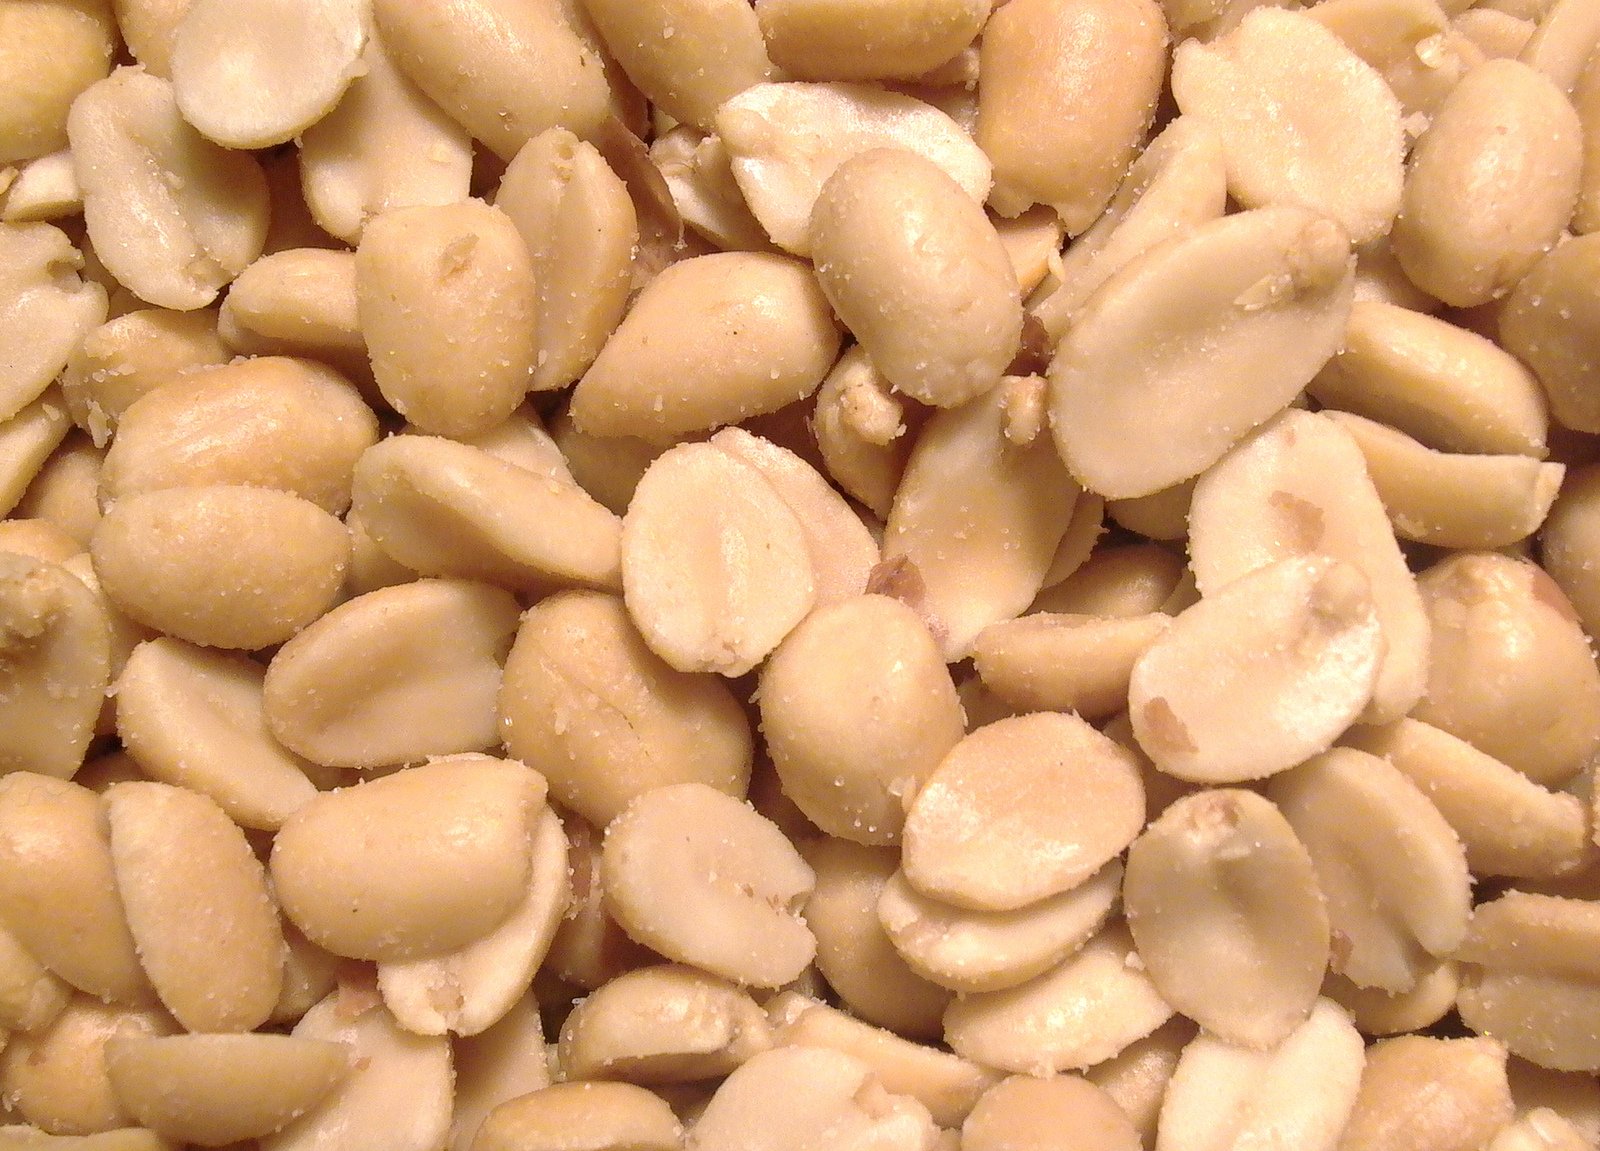 a closeup view of peanuts sprinkled with sugar